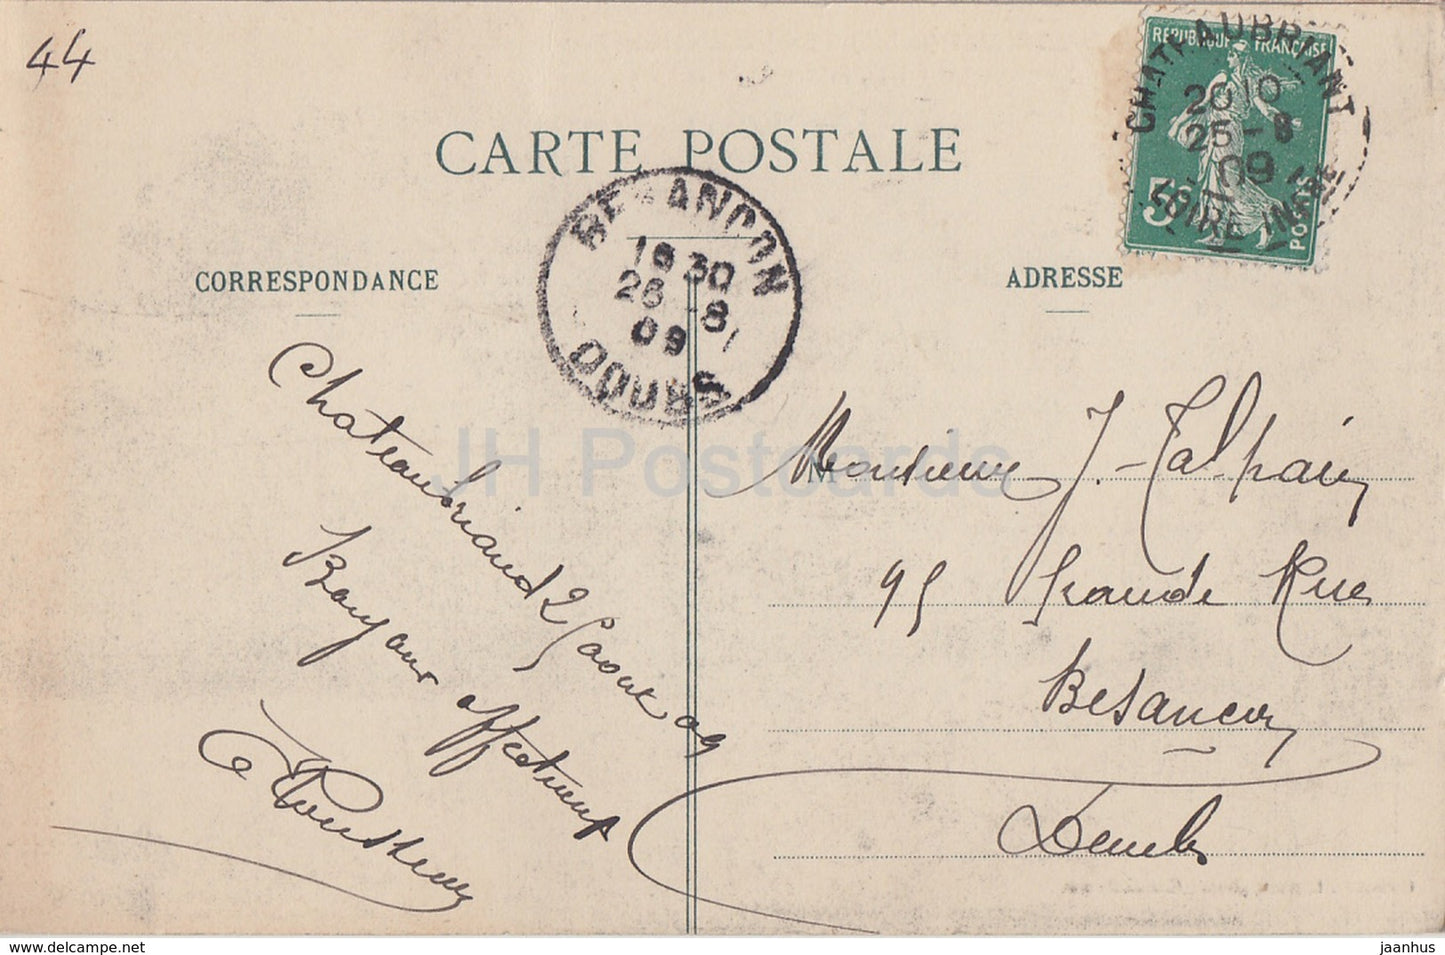 Chateaubriant - Donjon du Chateau Fort - castle - 147 - old postcard - 1909 - France - used